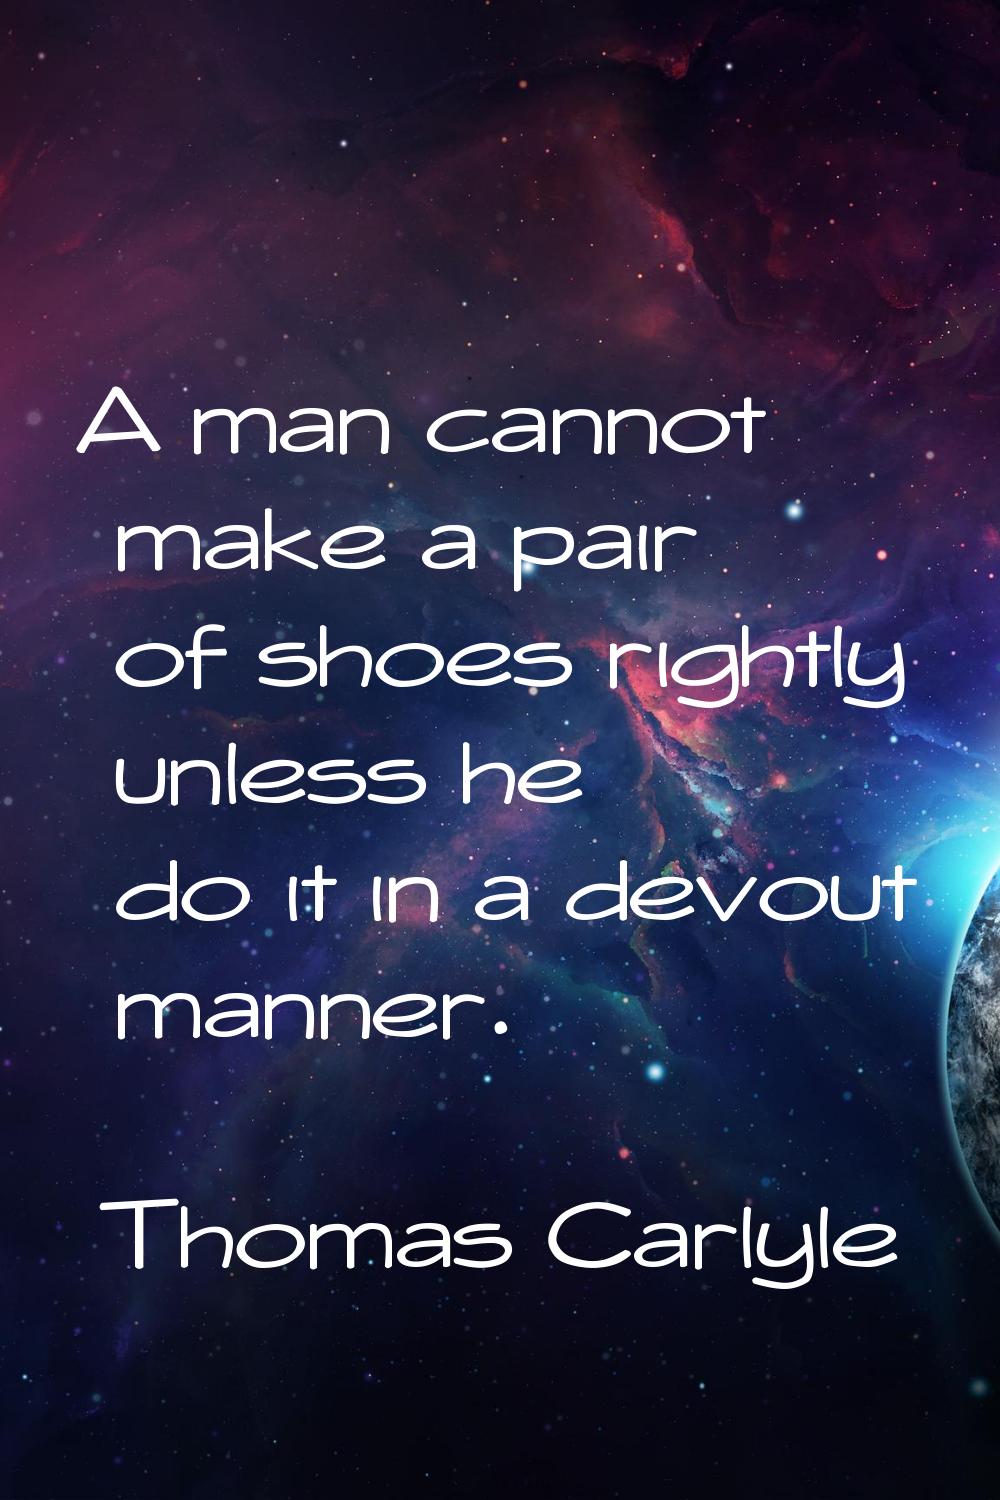 A man cannot make a pair of shoes rightly unless he do it in a devout manner.